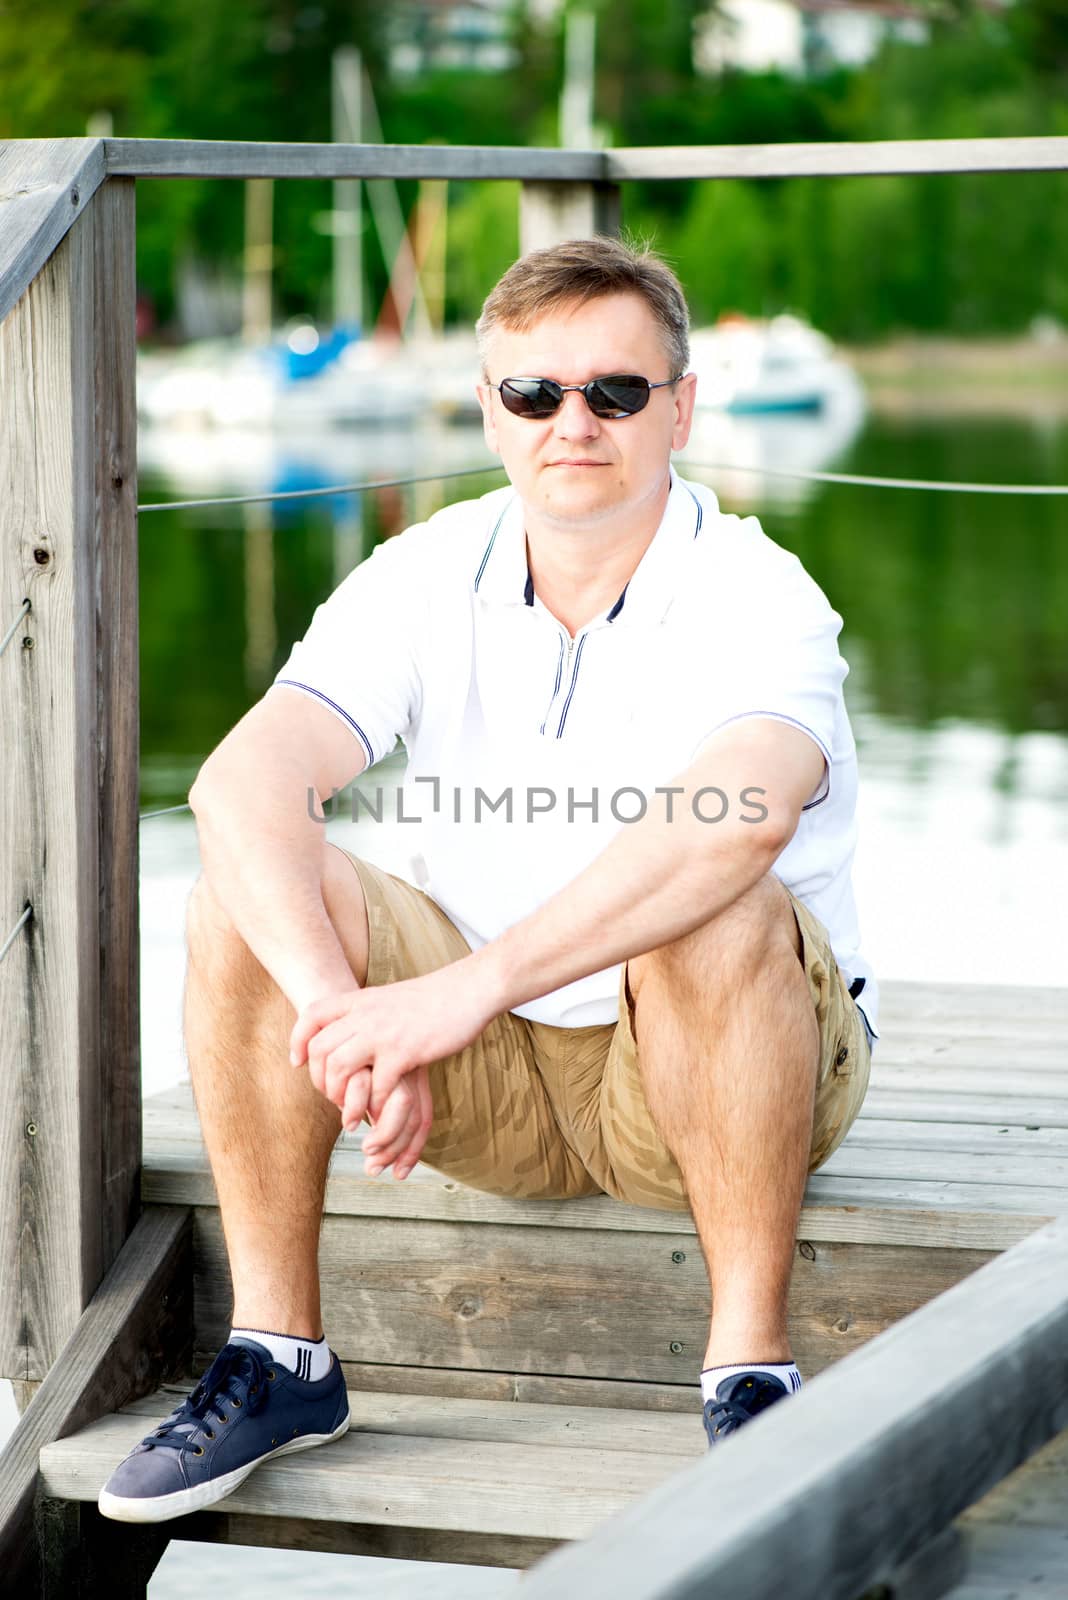 Mature man with sunglasses sitting at pier